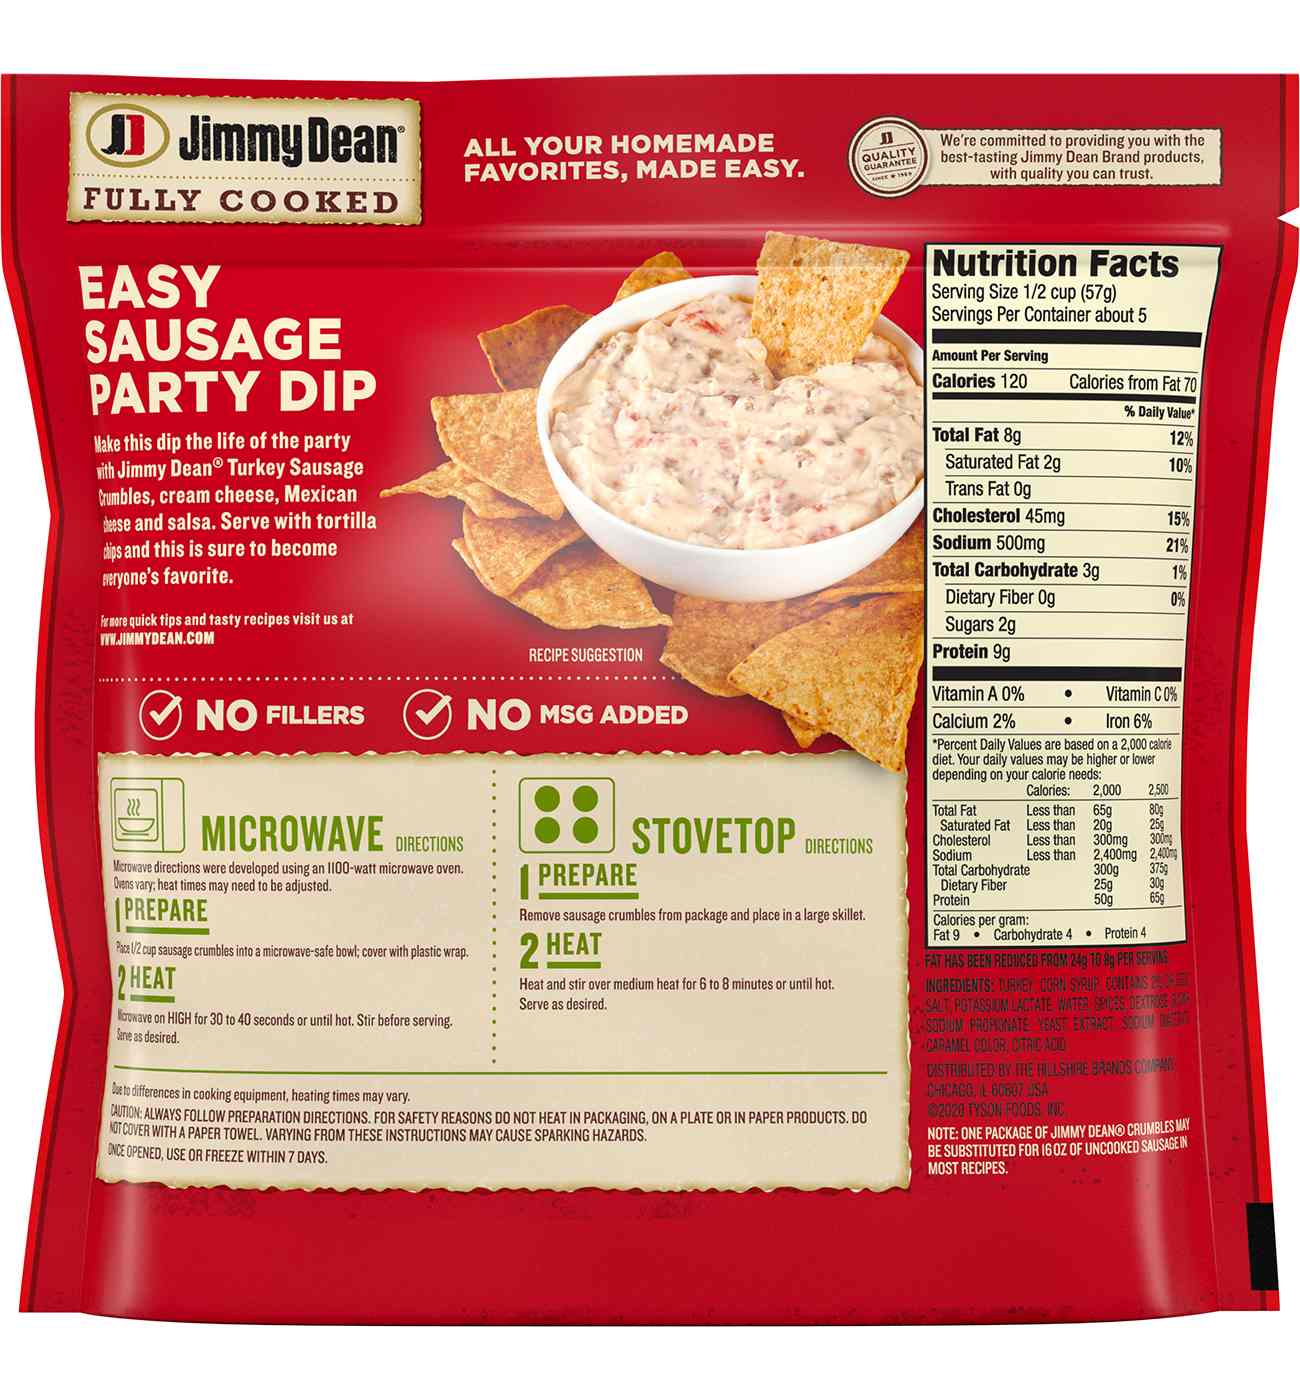 Jimmy Dean Fully Cooked Turkey Breakfast Sausage Crumbles; image 2 of 2